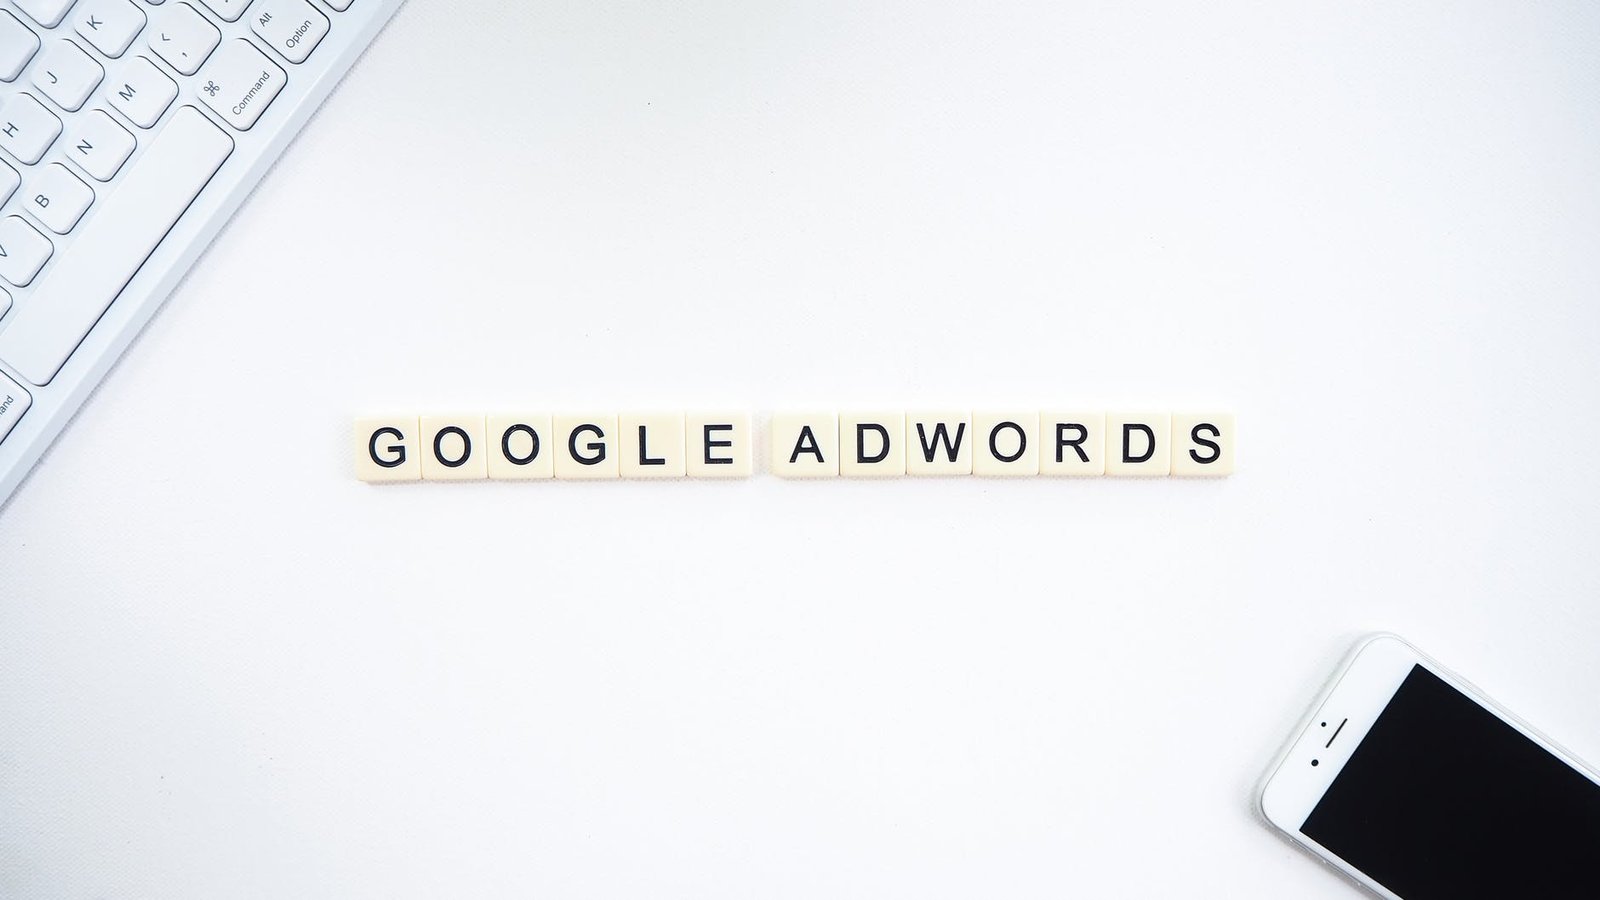 7 Reasons Your Business Should Invest in Google Adwords